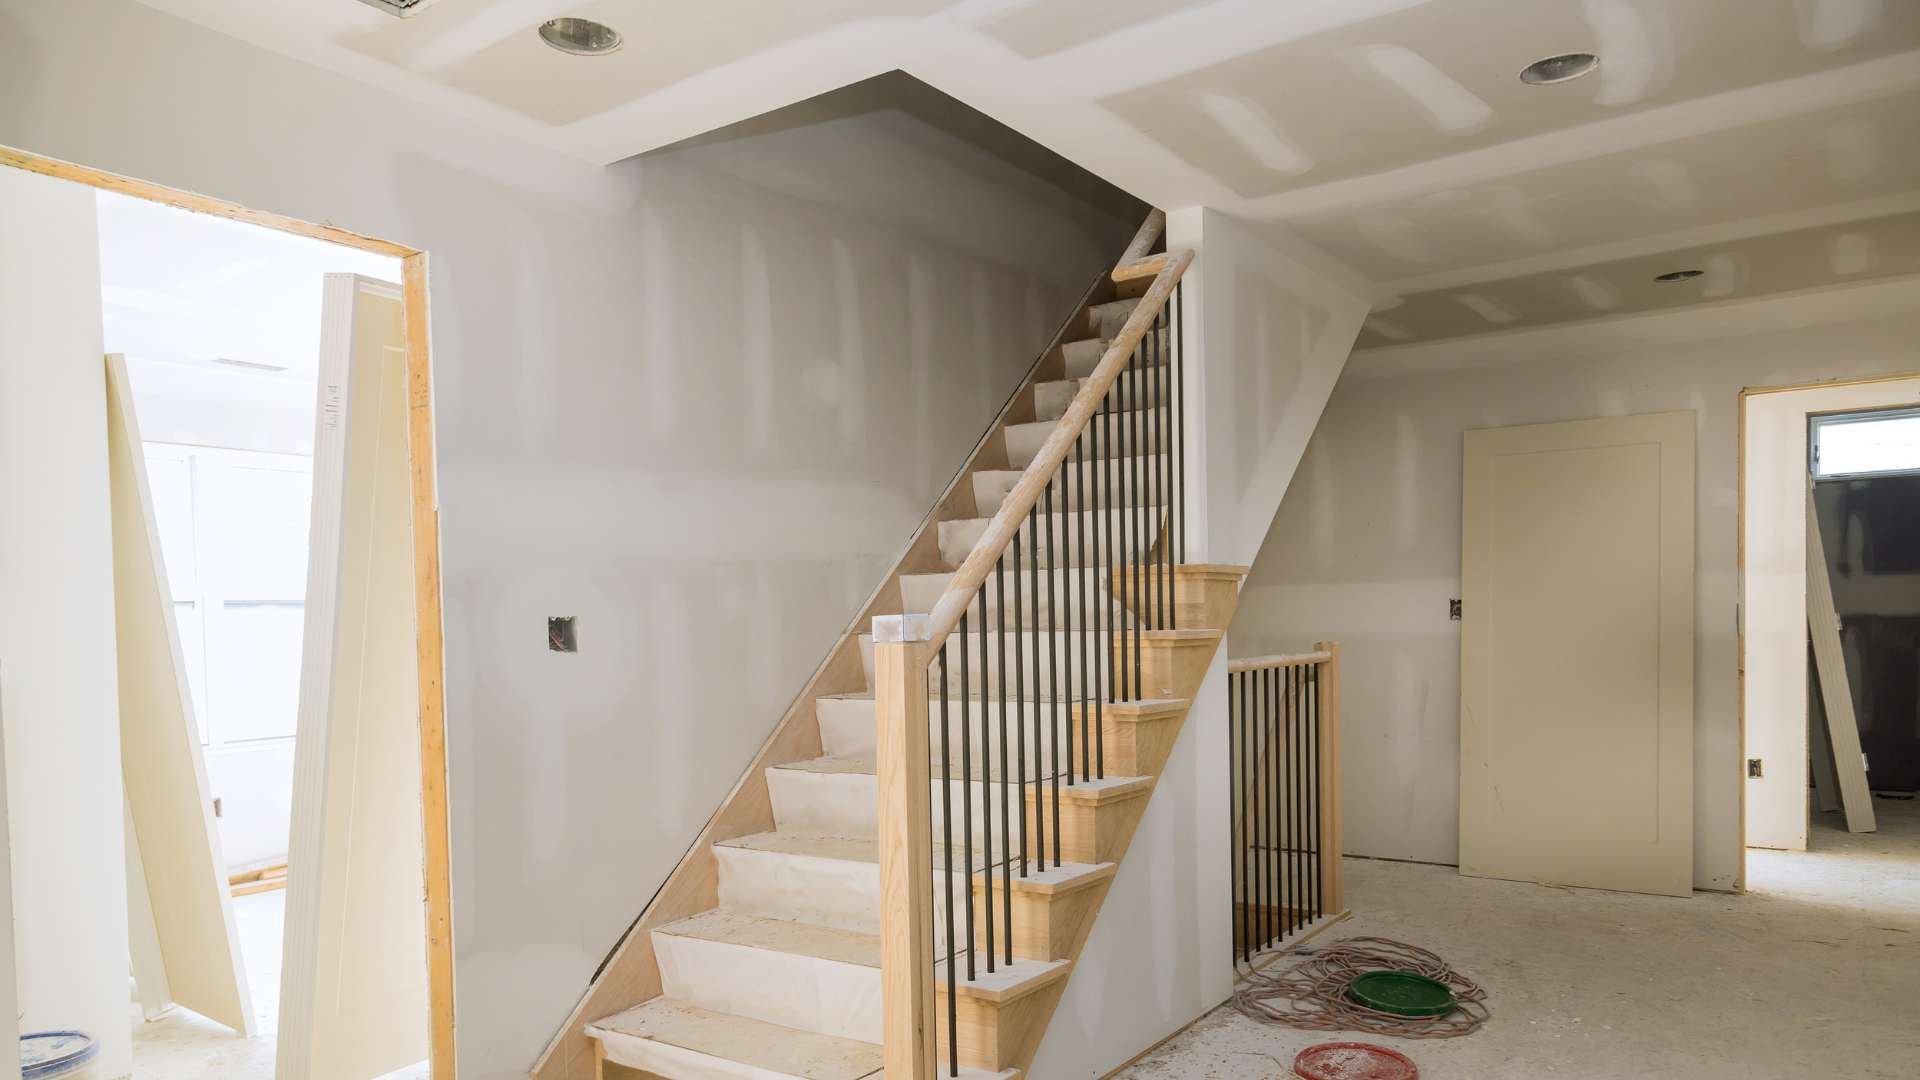 Staircase in home during construction